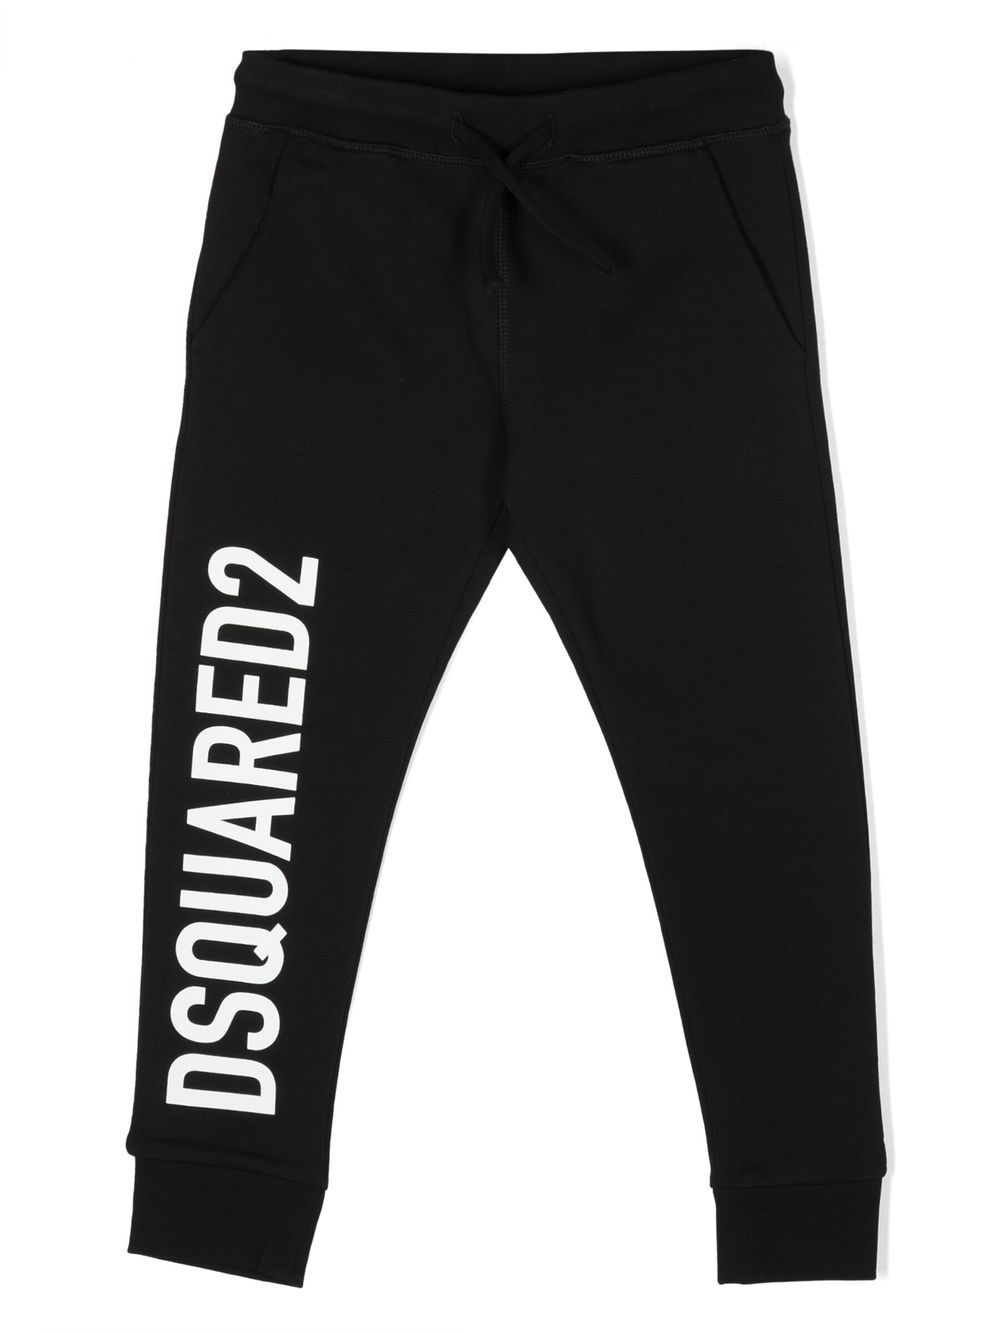 Black sports trousers for children